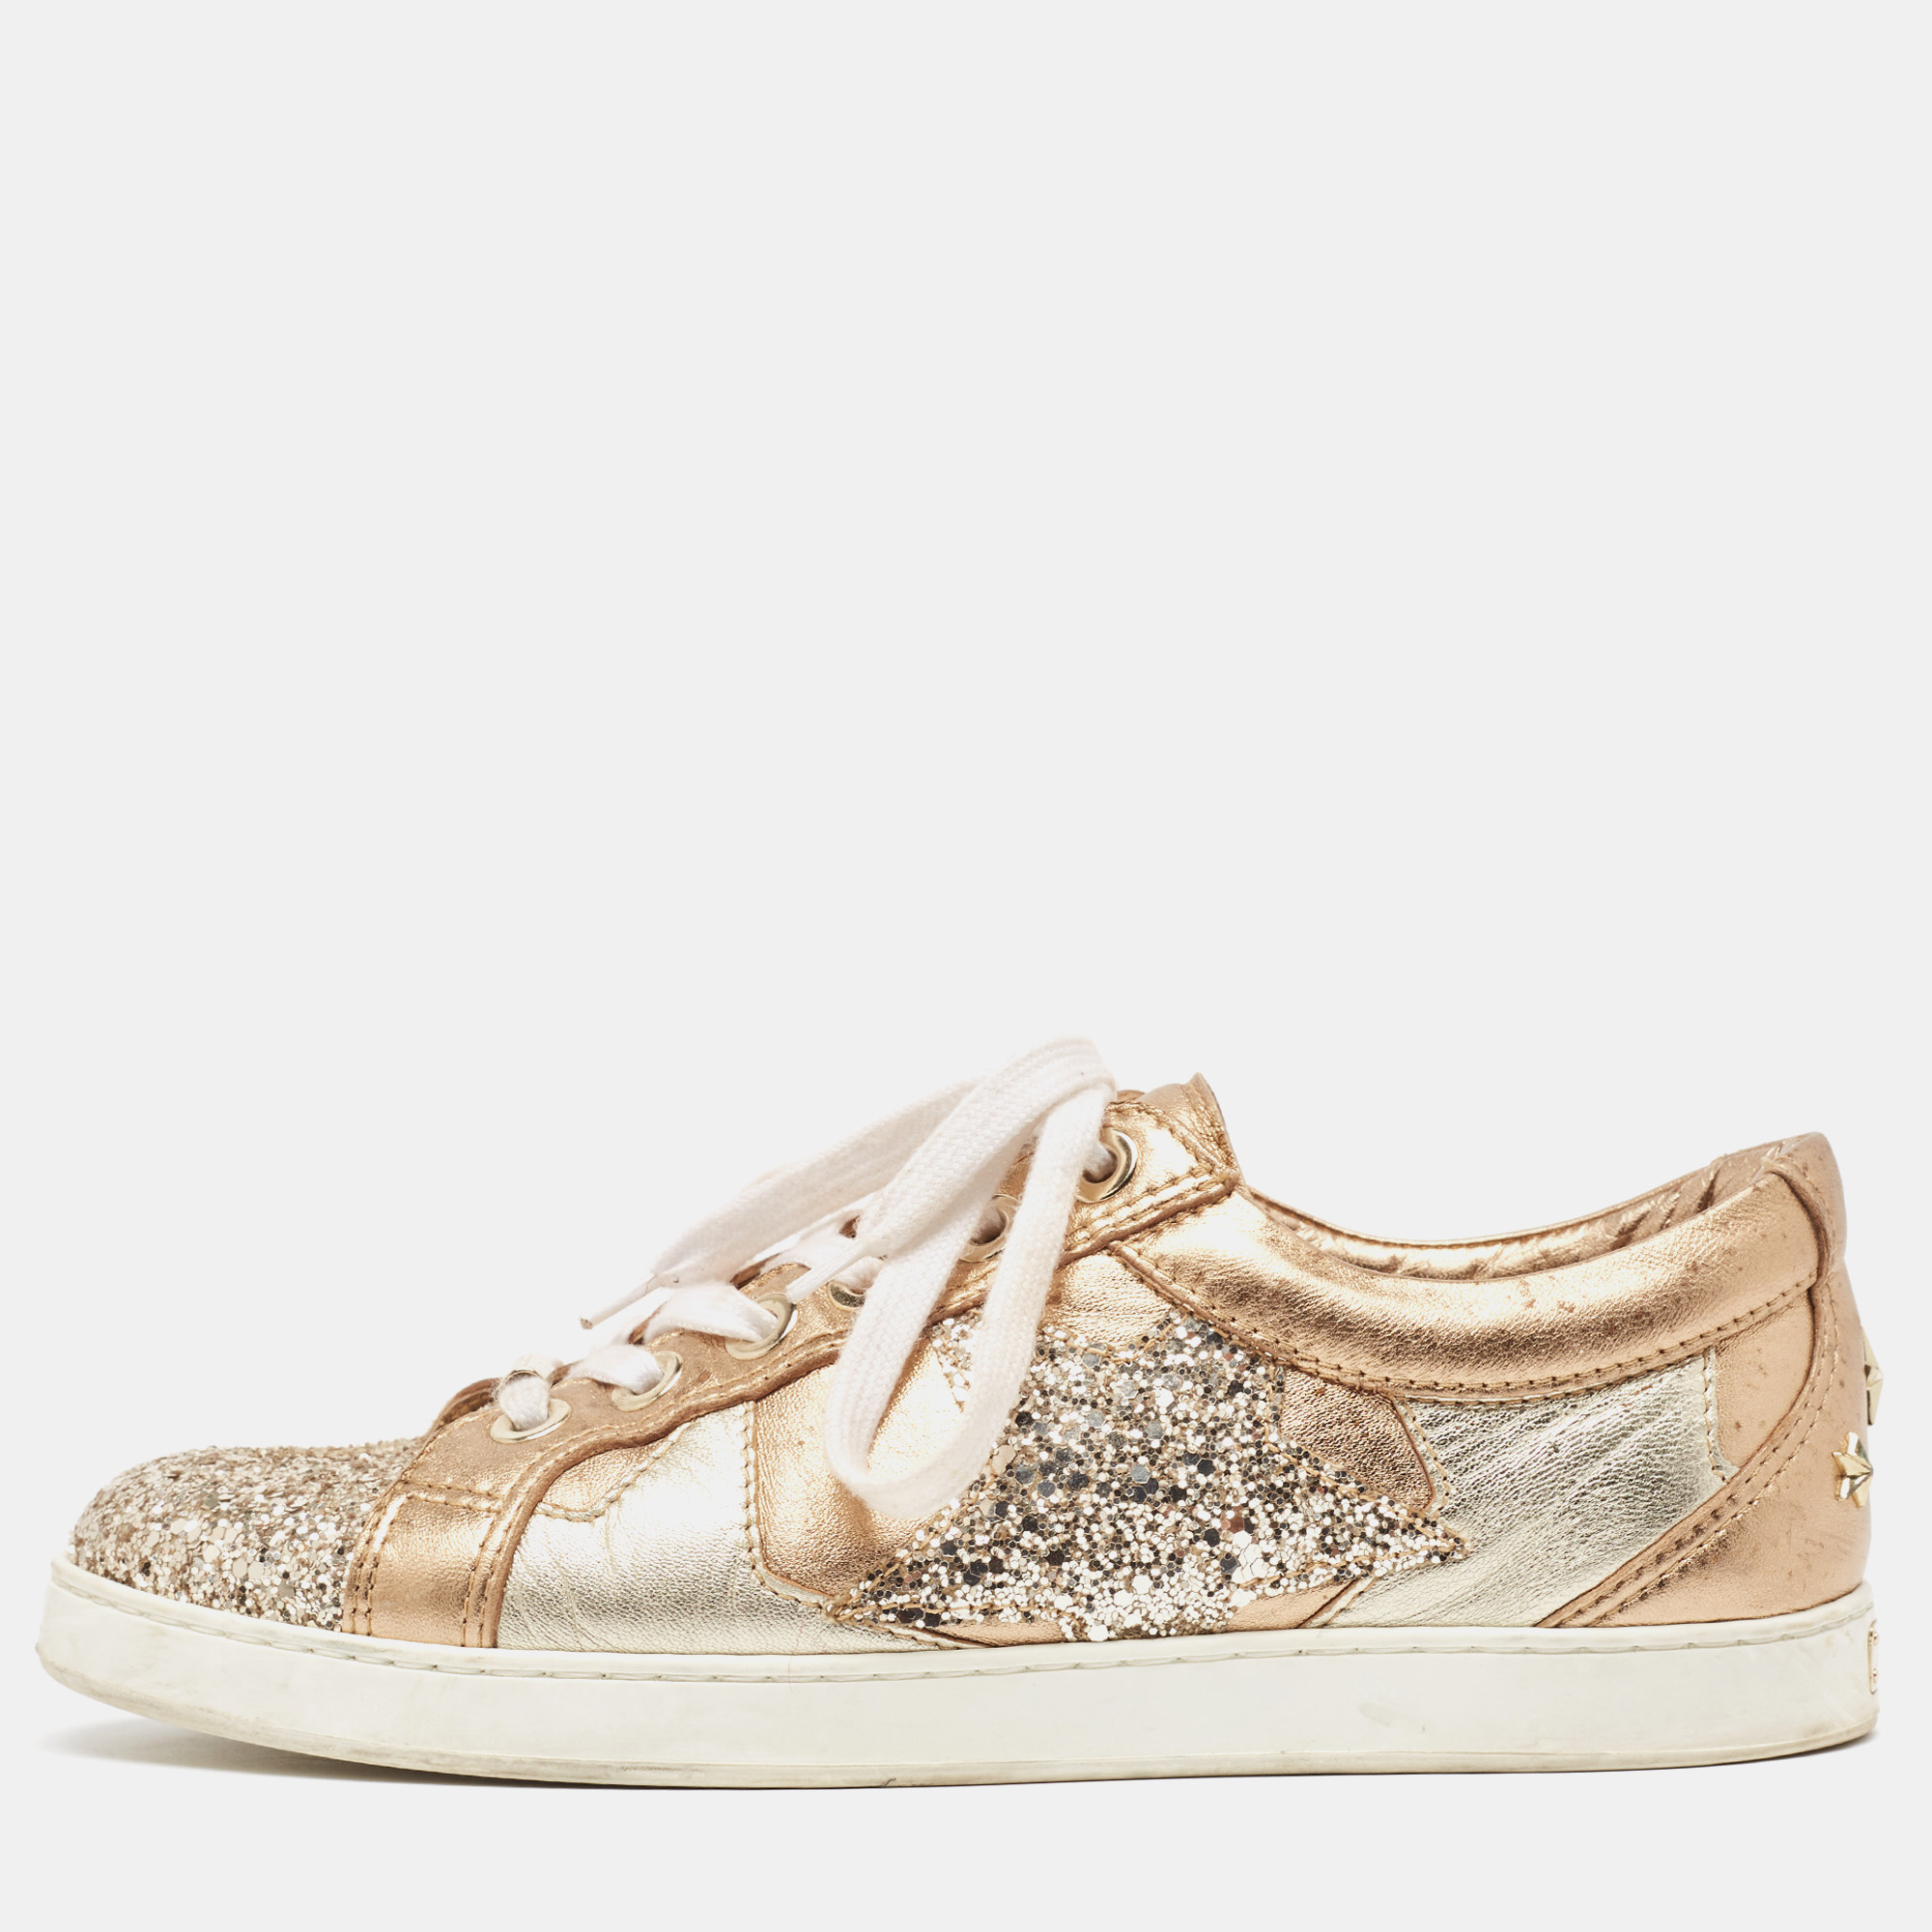 Pre-owned Jimmy Choo Metallic Leather And Glitter Low Top Sneakers Size 39